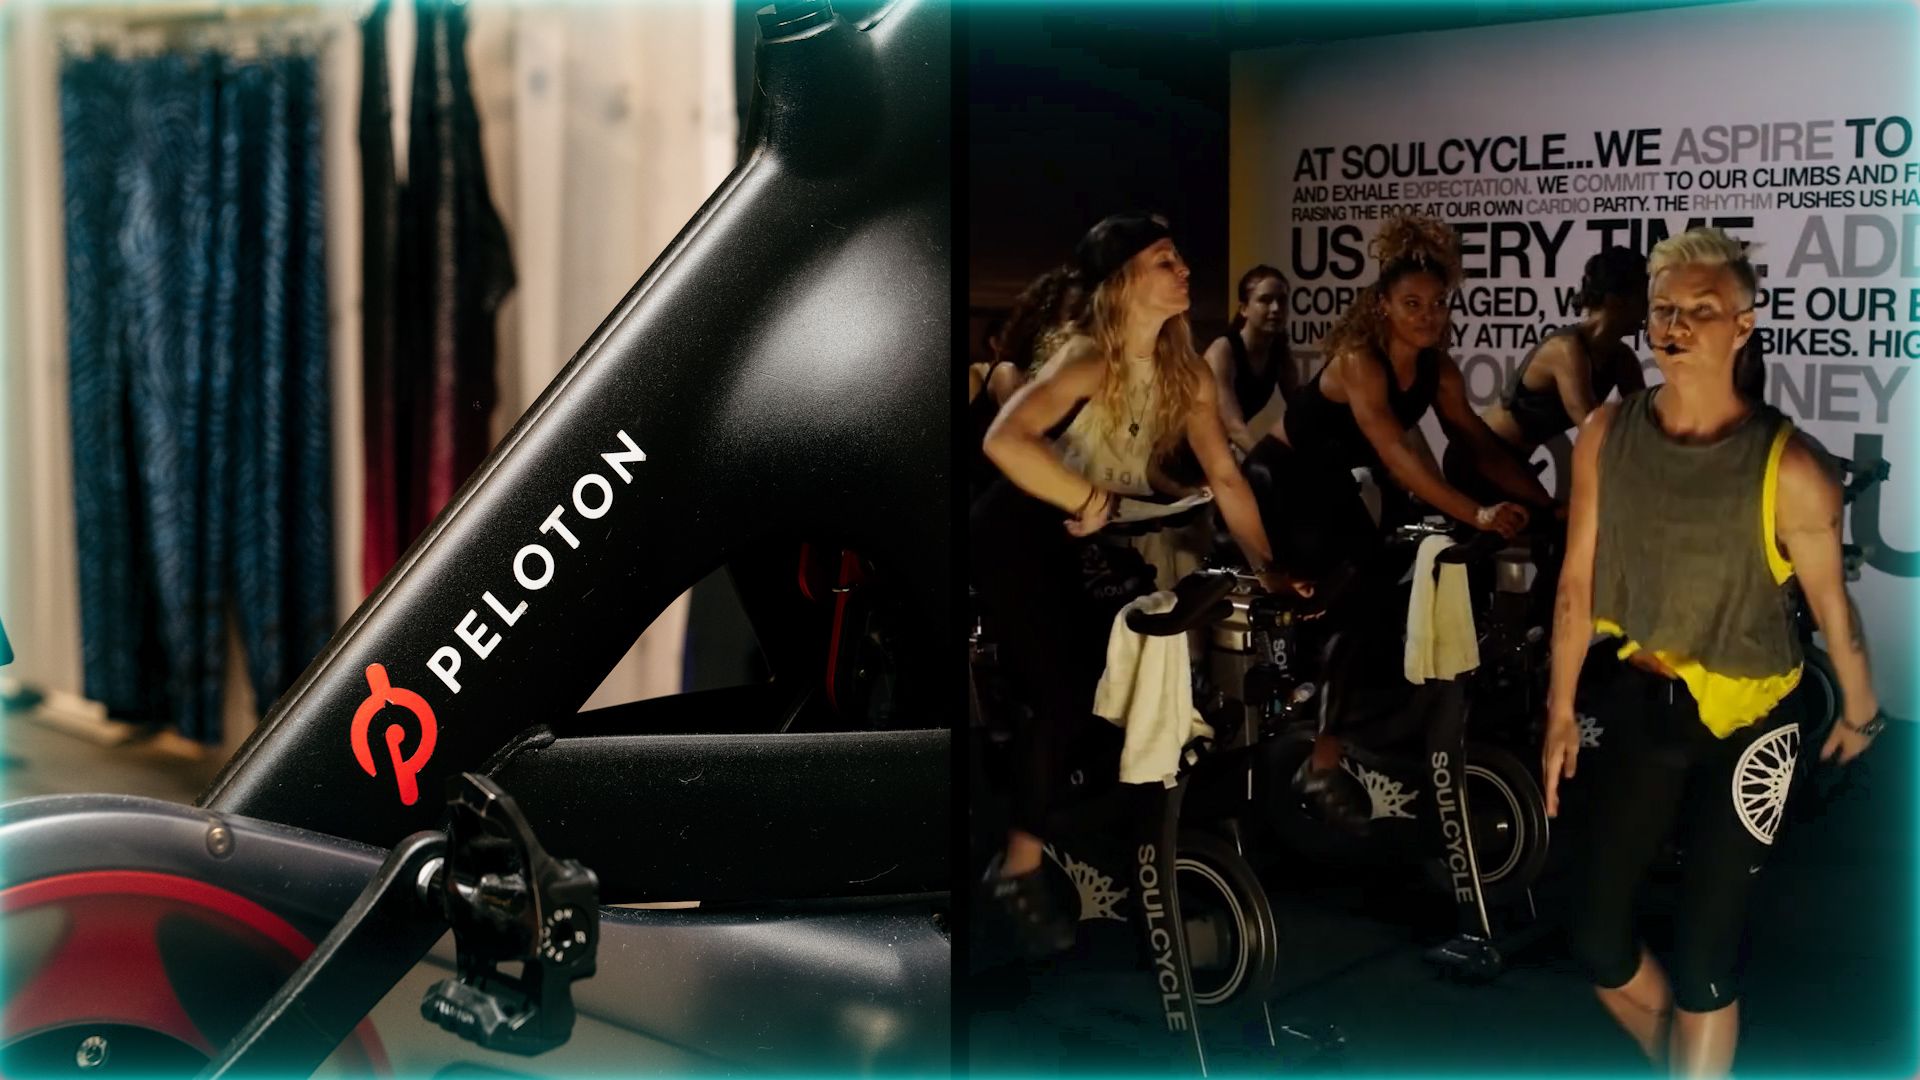 Peloton & lululemon have announced a new 5 year partnership. lululemon will  become the primary athletic apparel partner for Peloton, wh